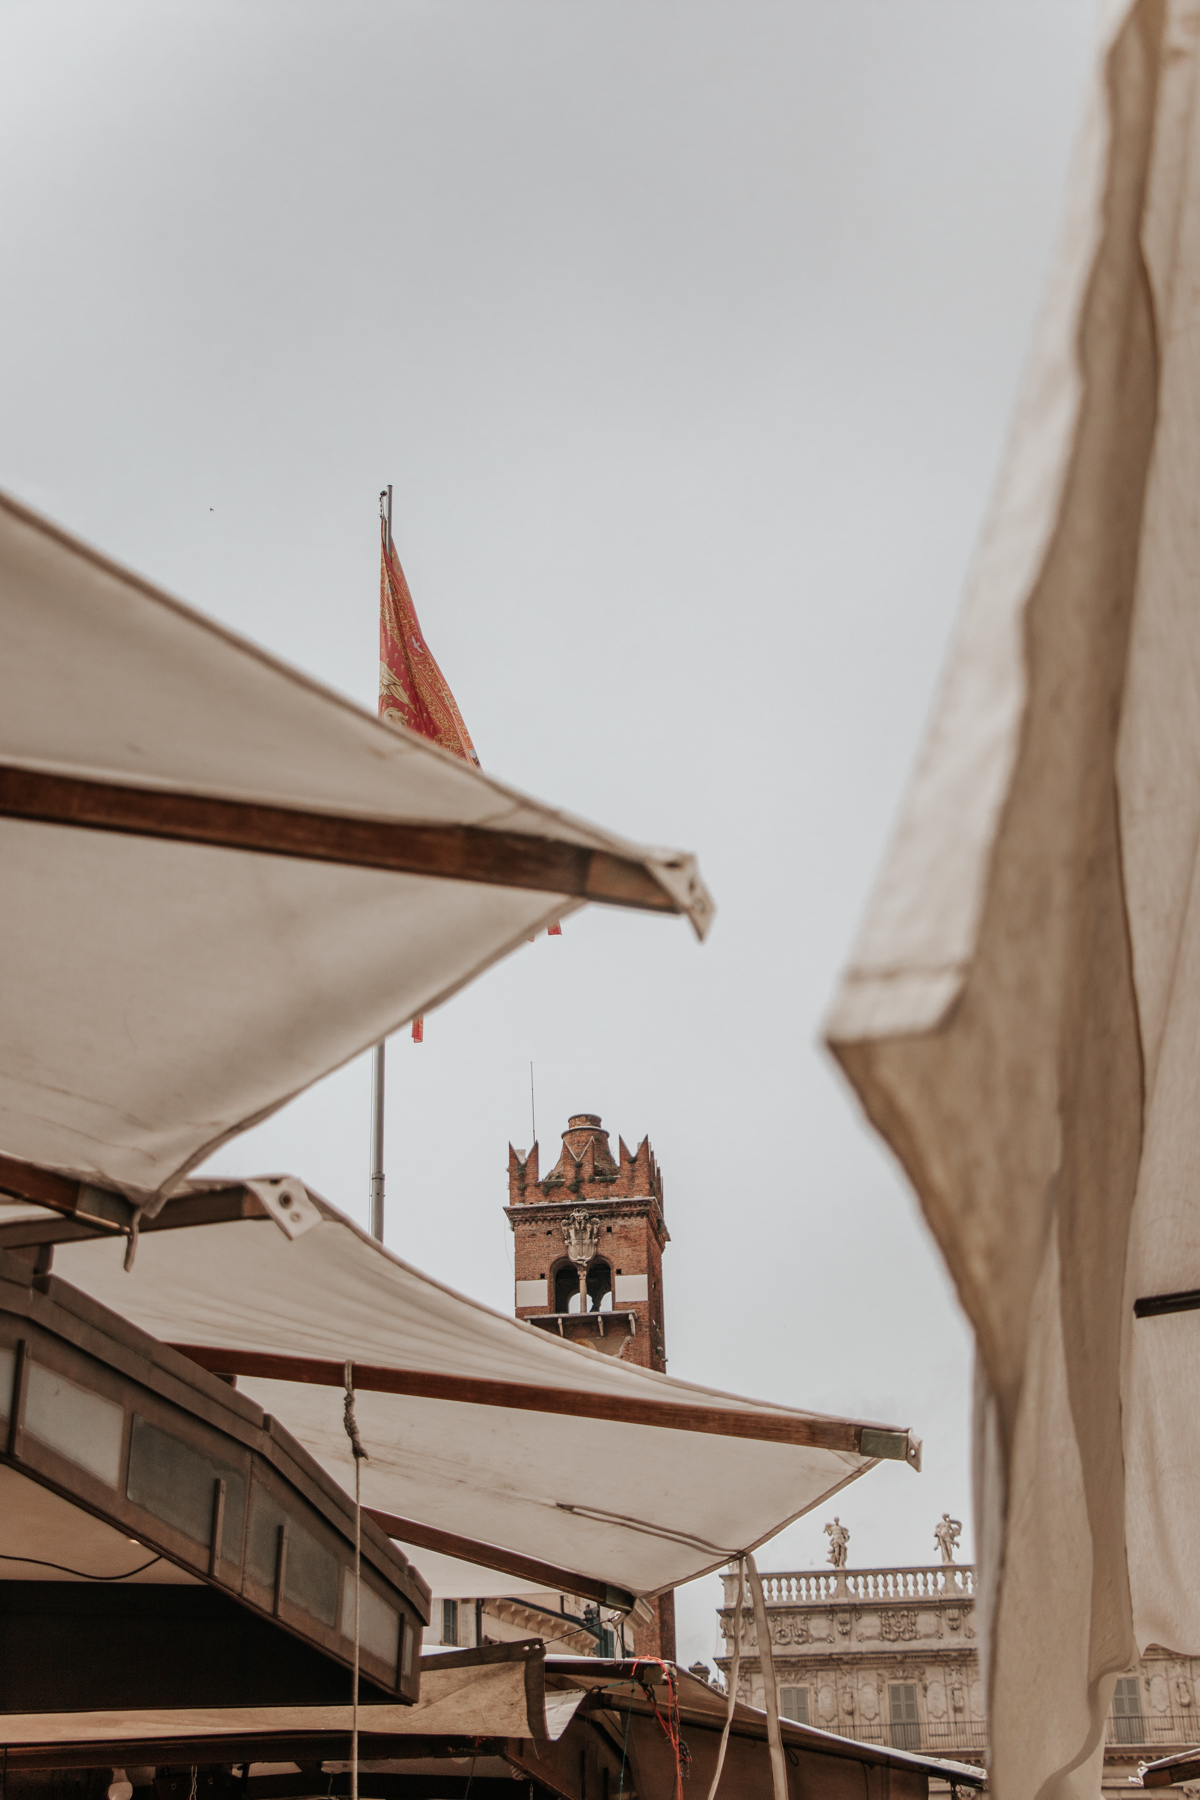 Gothic tower peeking out behind white umbrella-like roofs in Piazza delle Erbe in Verona, Italy